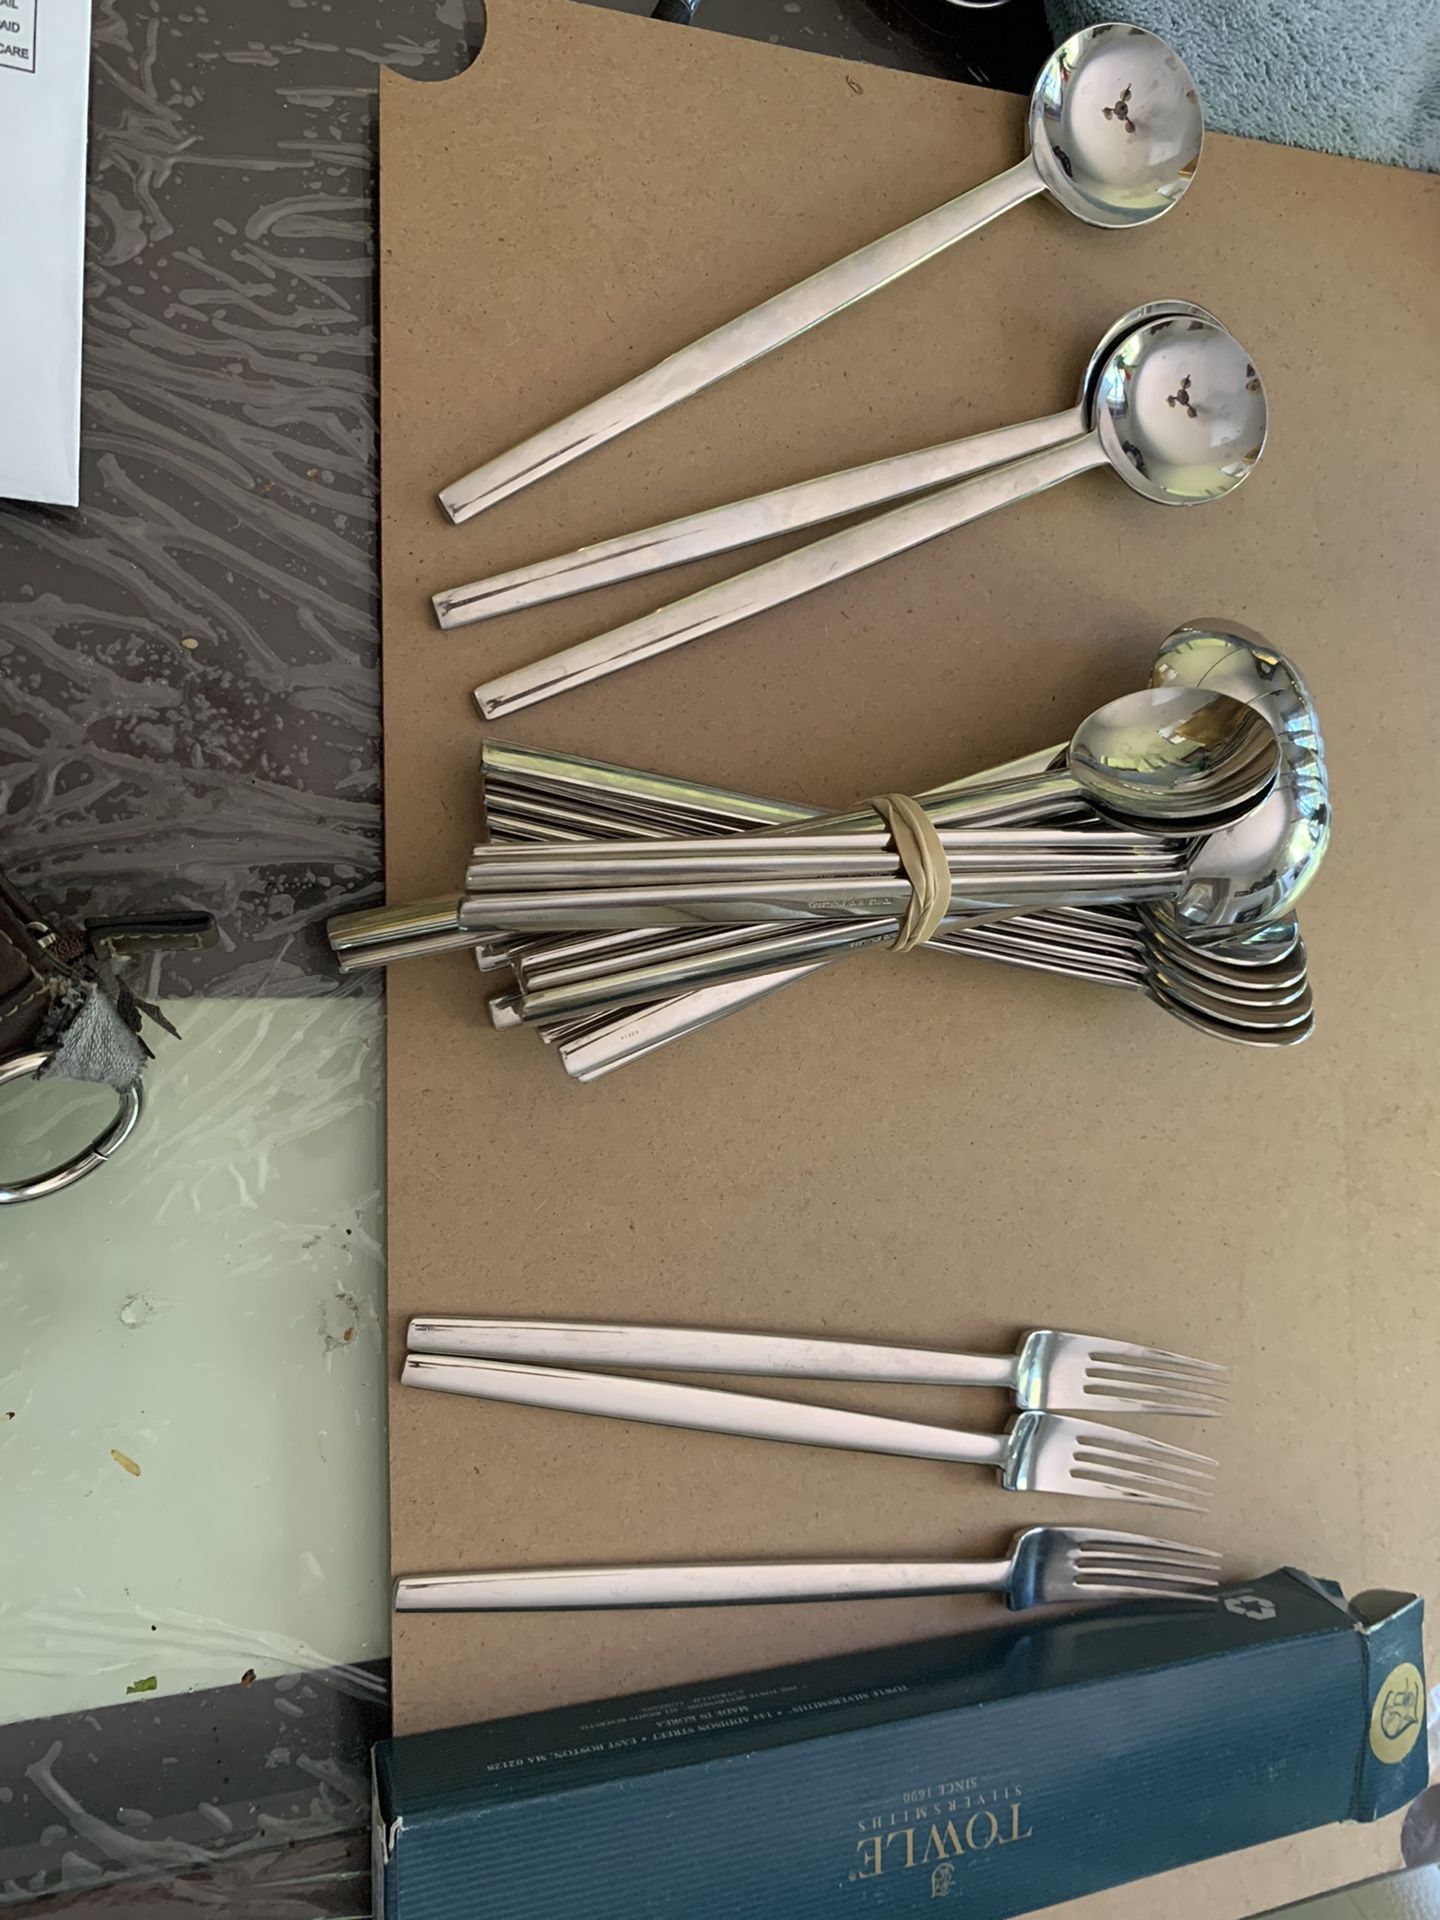 24 Table spoon and24 forks